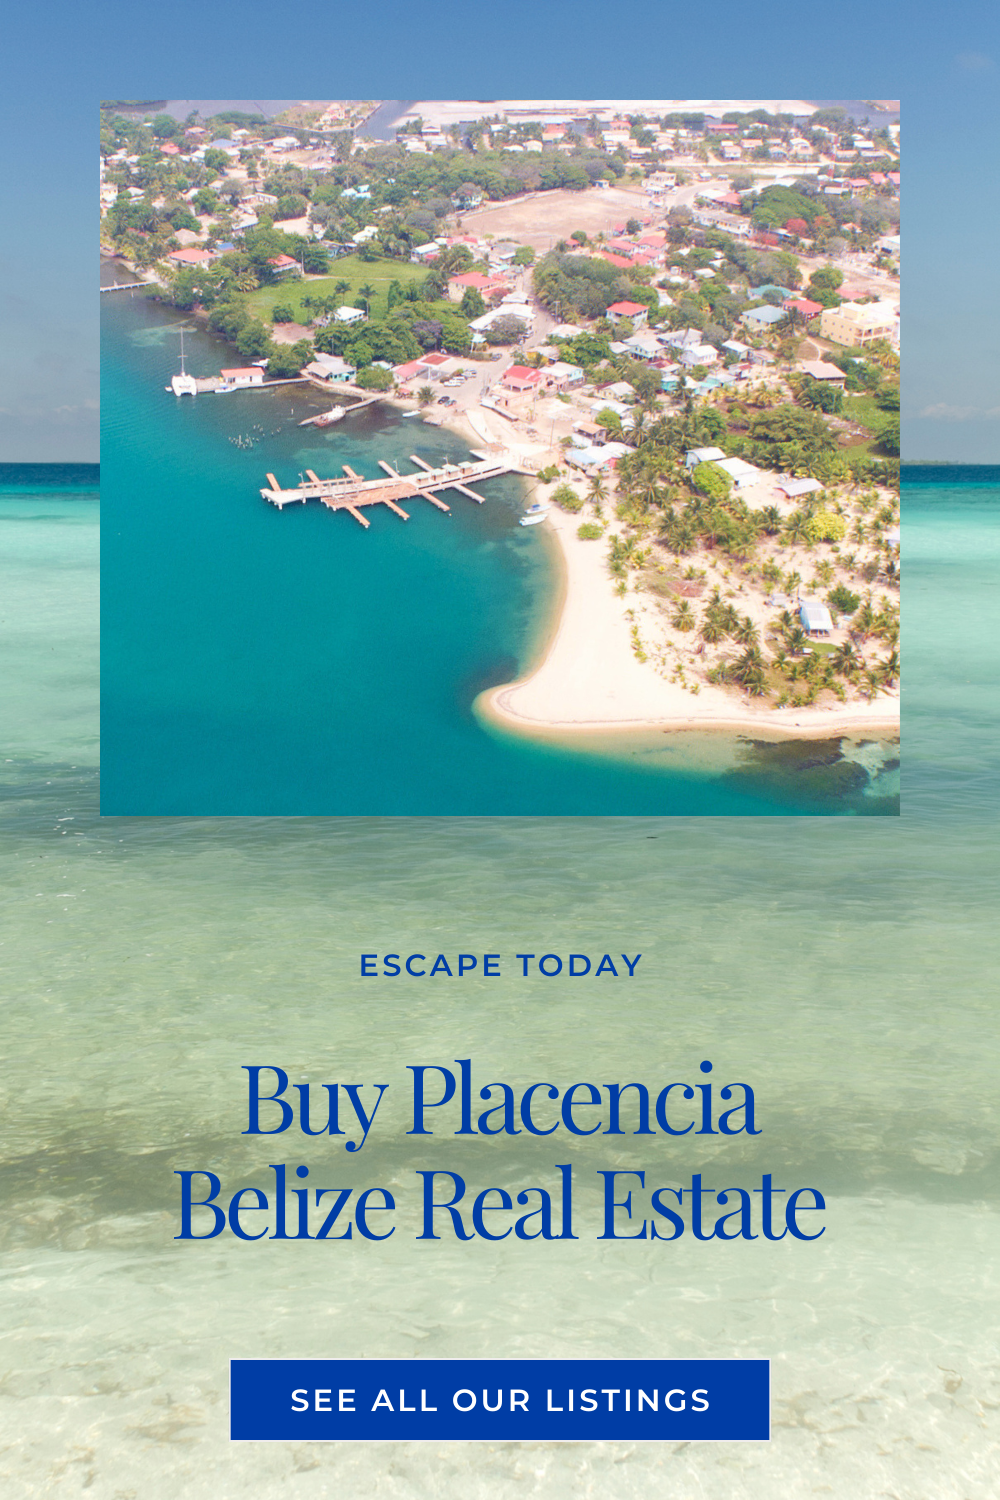 Invest in your Caribbean dream and escape to paradise. Buy Placencia Belize real estate with REMAX VIP.